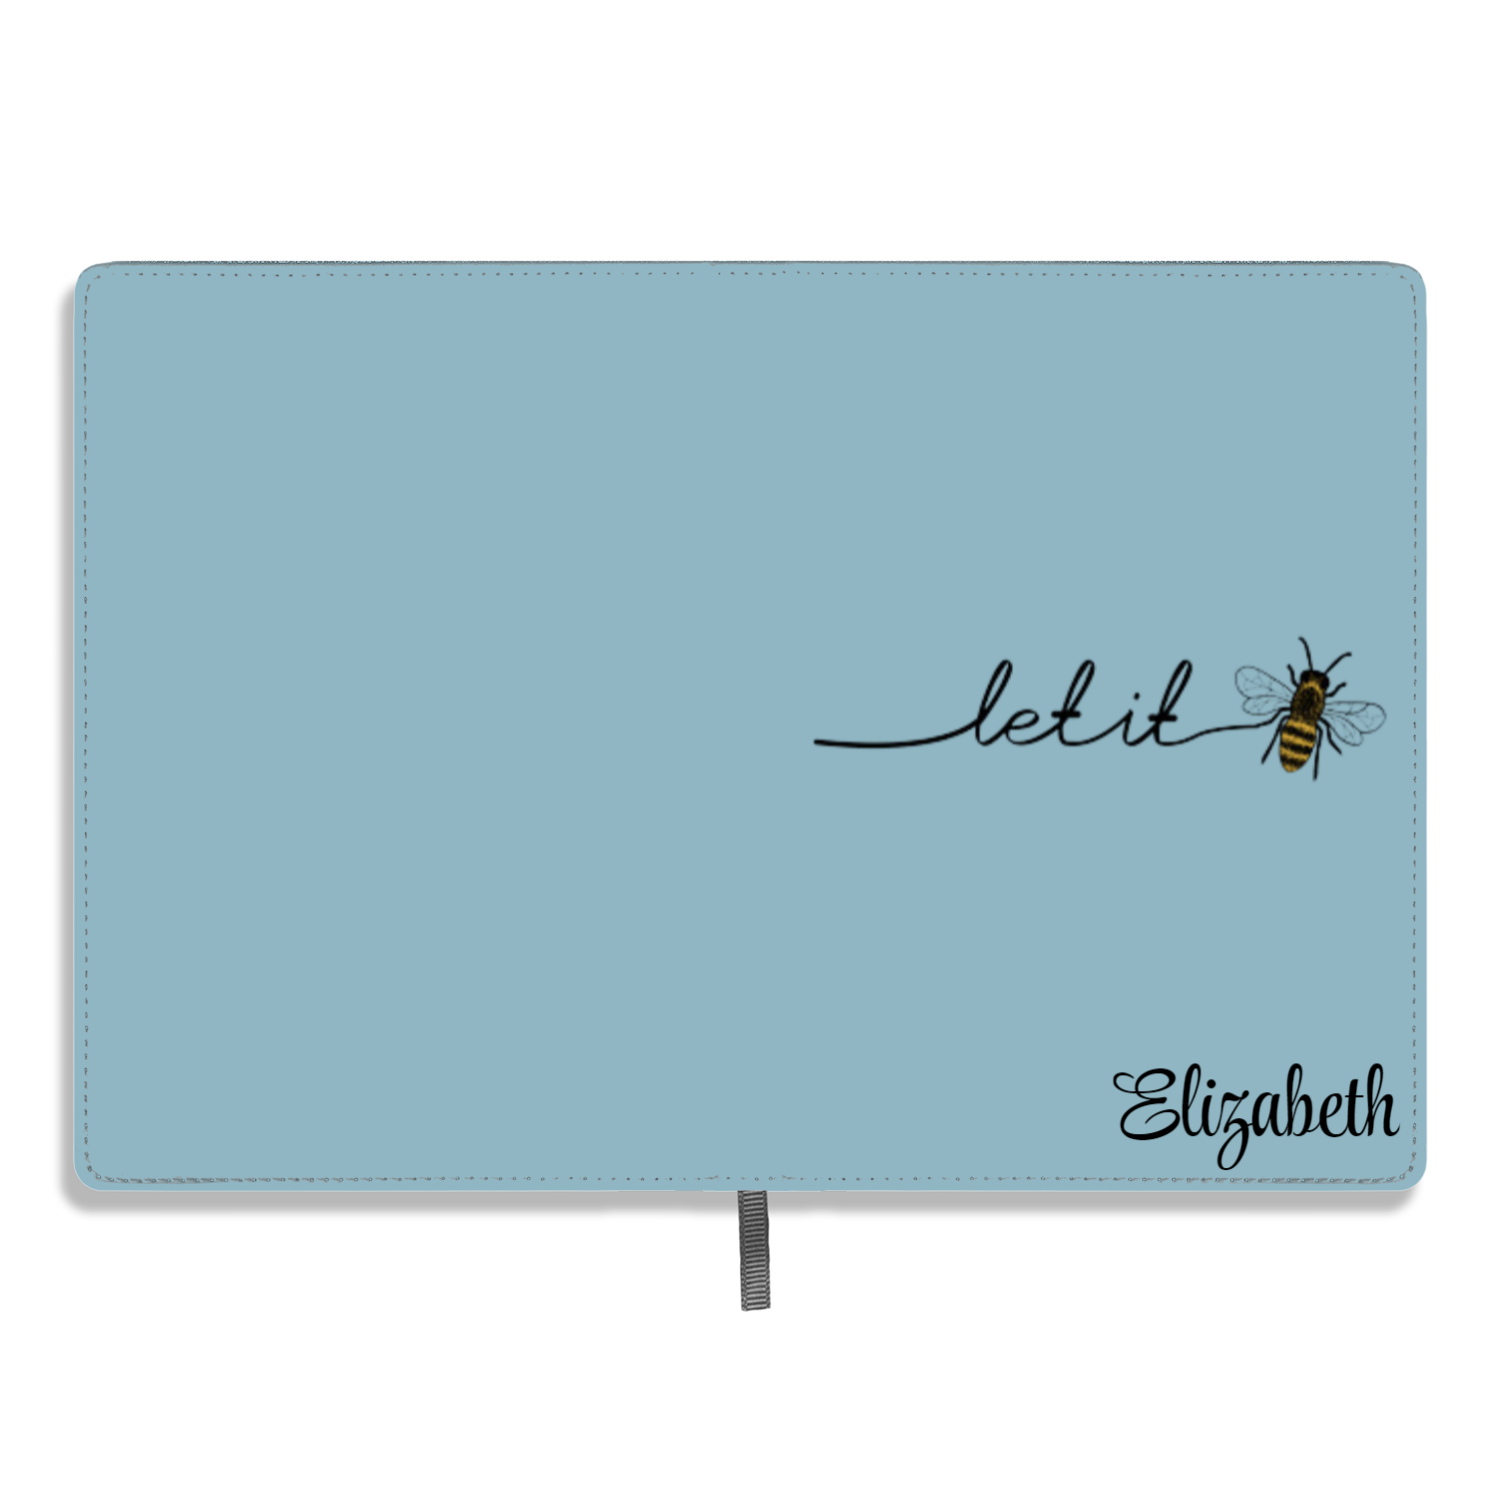 Personalized Notebook/Journals - Personalized Note Book: Let It be 